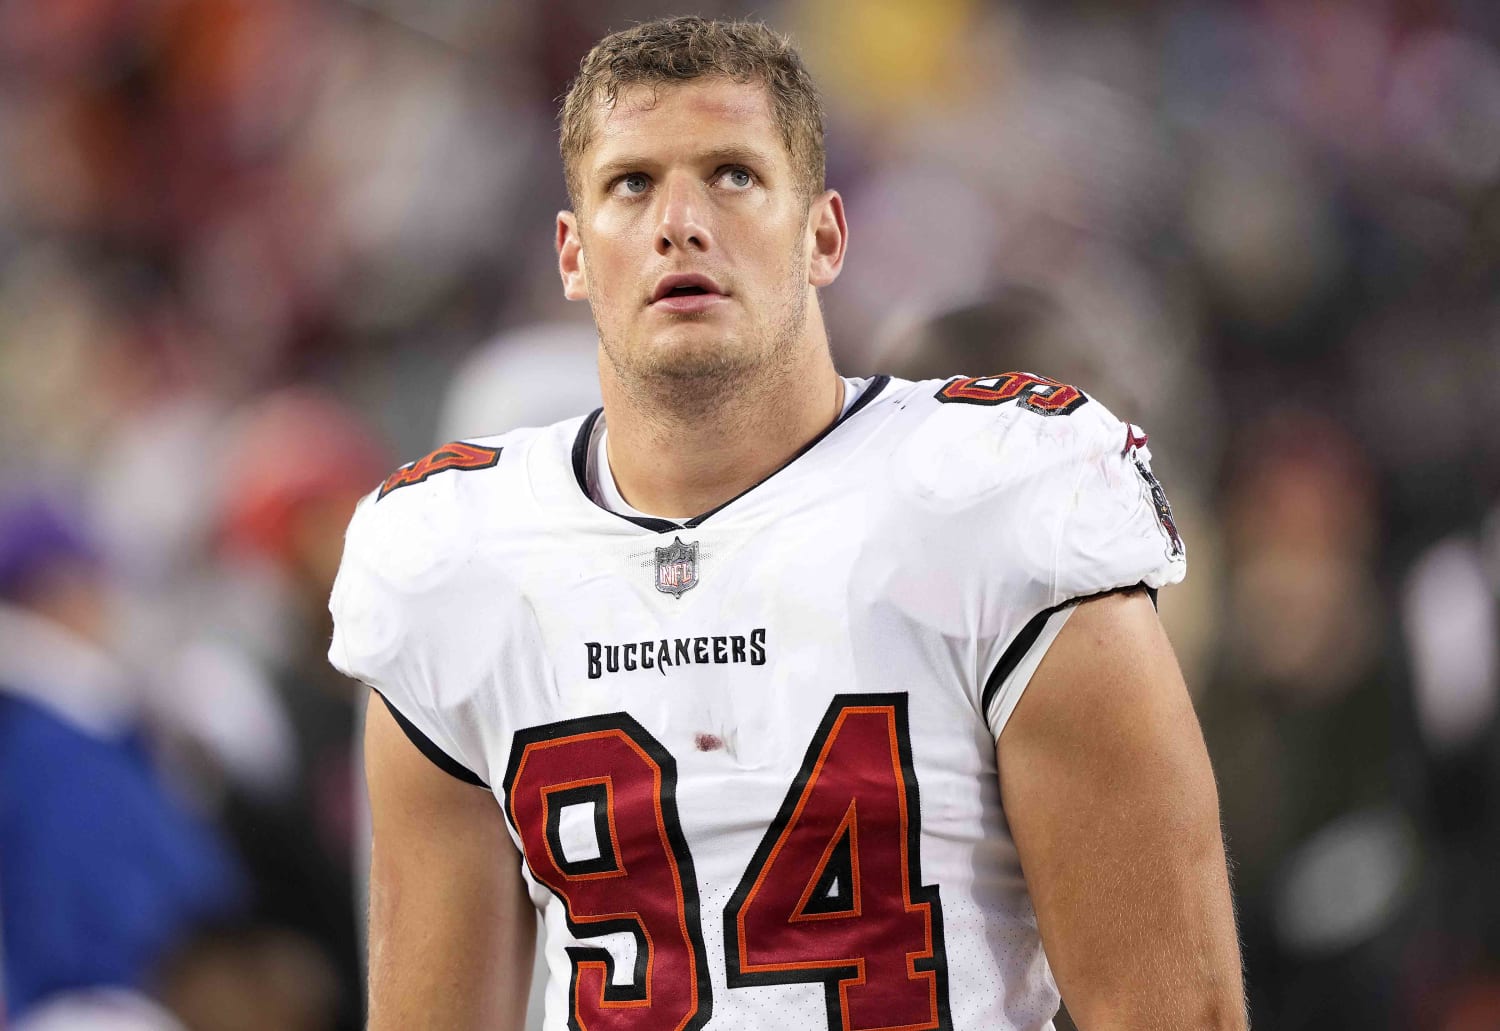 Carl Nassib, the NFL's 1st Openly Gay Active Player, Announces Retirement